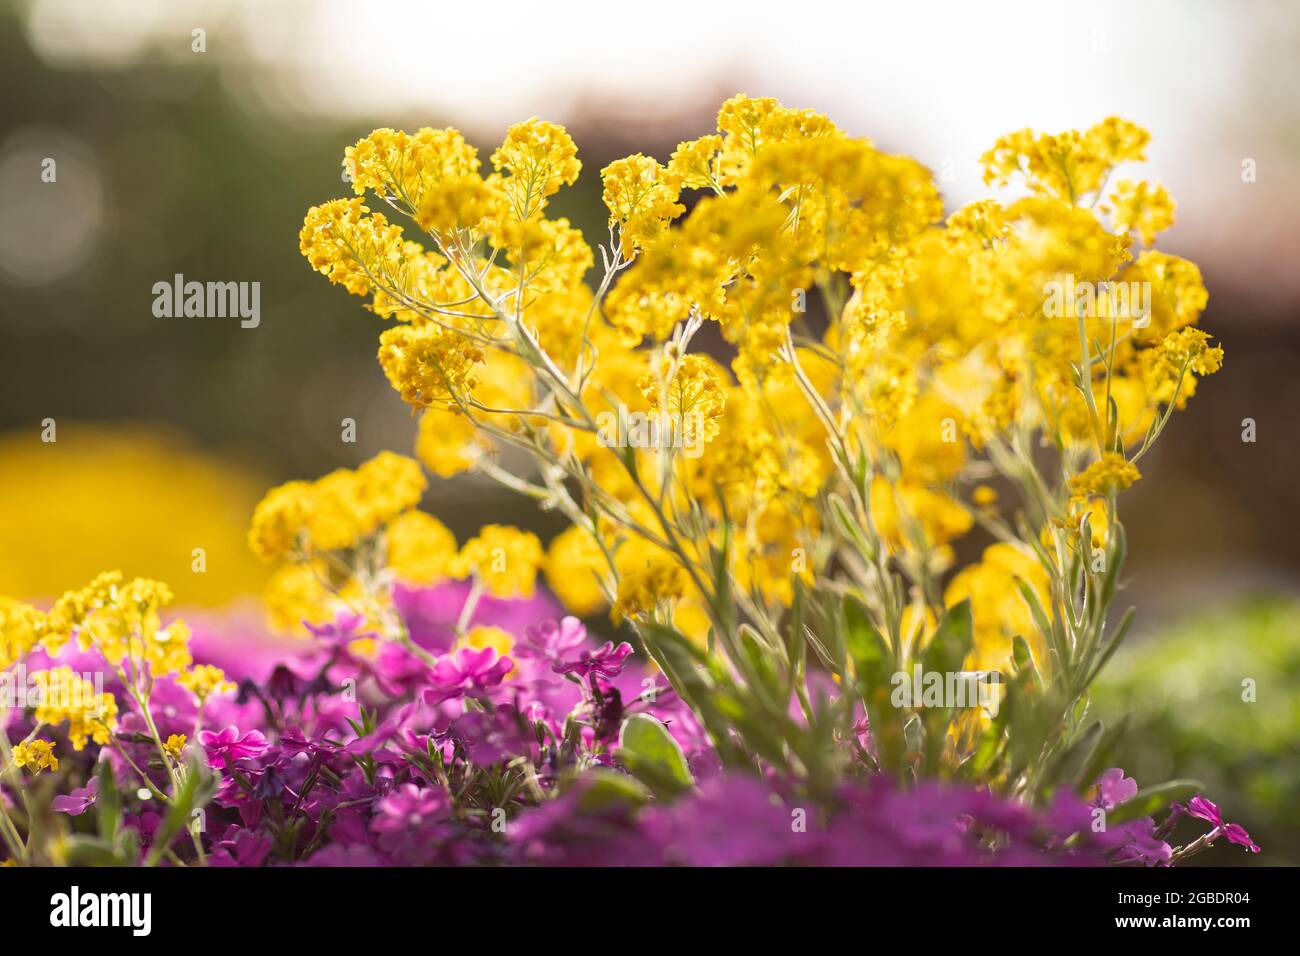 Golden aurinia saxatilis flowers and purple aubrieta cascade with lots of small petals beautifully blooming in a garden surrounded by greenery on a su Stock Photo